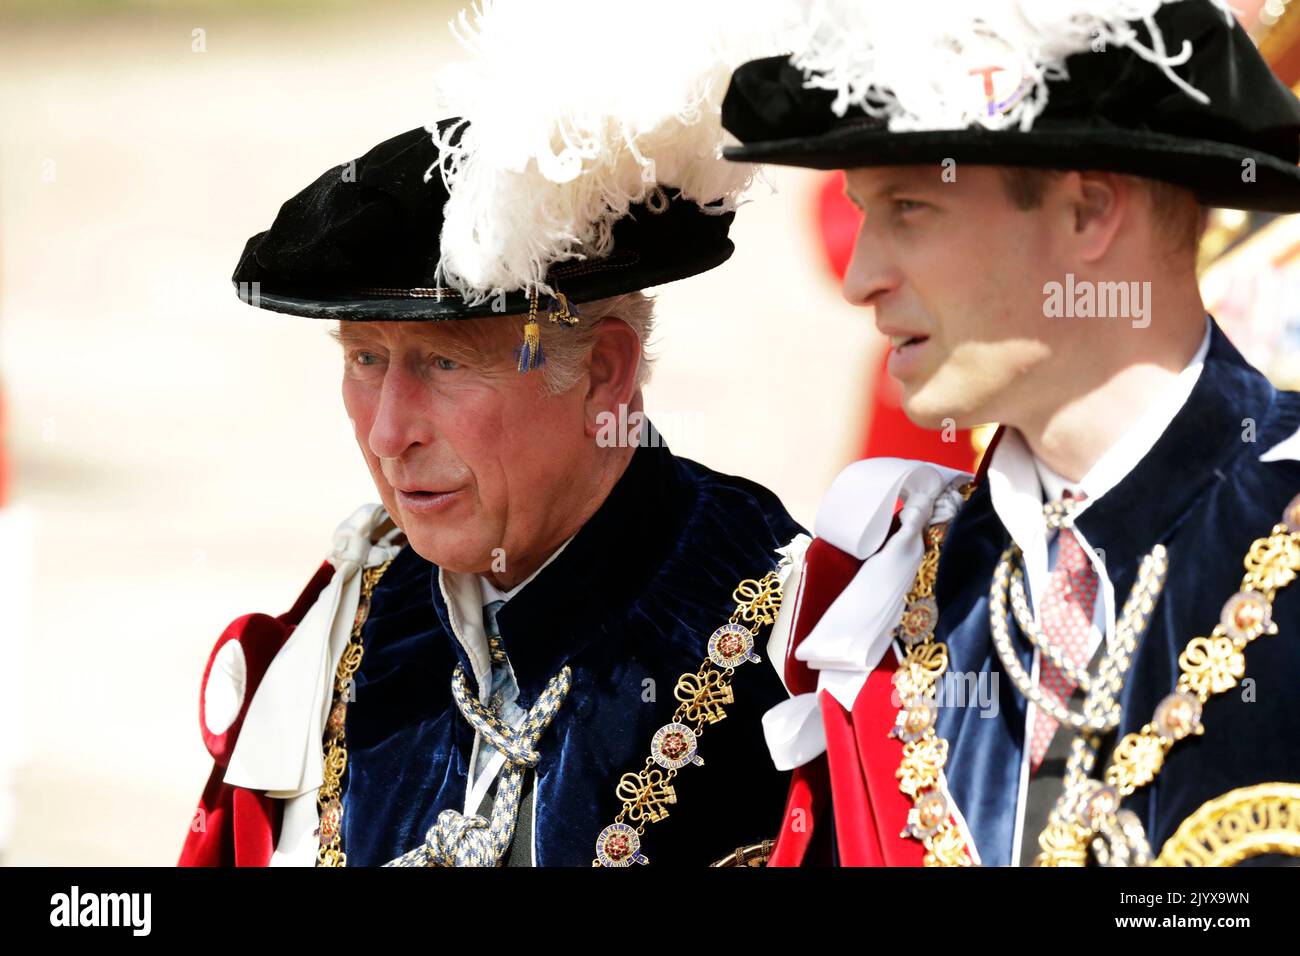 File photo dated 18/6/2018 of the Prince of Wales (left) and the Duke of Cambridge attending the annual Order of the Garter Service at St George's Chapel, Windsor Castle. Issue date: Thursday September 8, 2022. The Duke and Duchess of Sussex plunged the royal family into one of the most challenging periods in modern royal history during the later years of the Queen's reign but a return to the UK for the funeral could offer Harry the chance to reunite with his family amid their shared grief and heartache for the loss of the Queen. Stock Photo